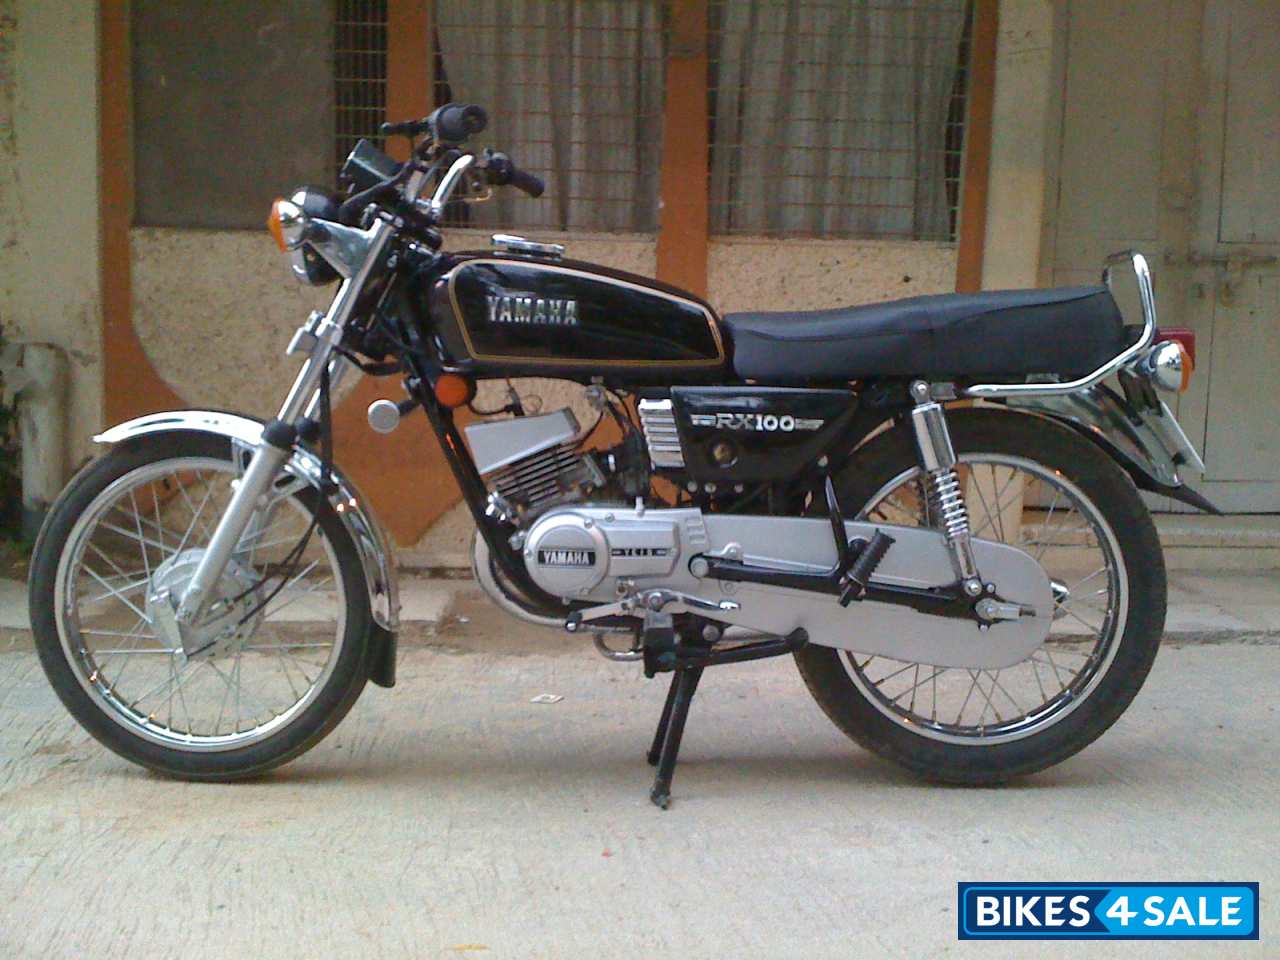 Used 1987 Model Yamaha Rx 100 For Sale In Hyderabad Id Black Colour Bikes4sale